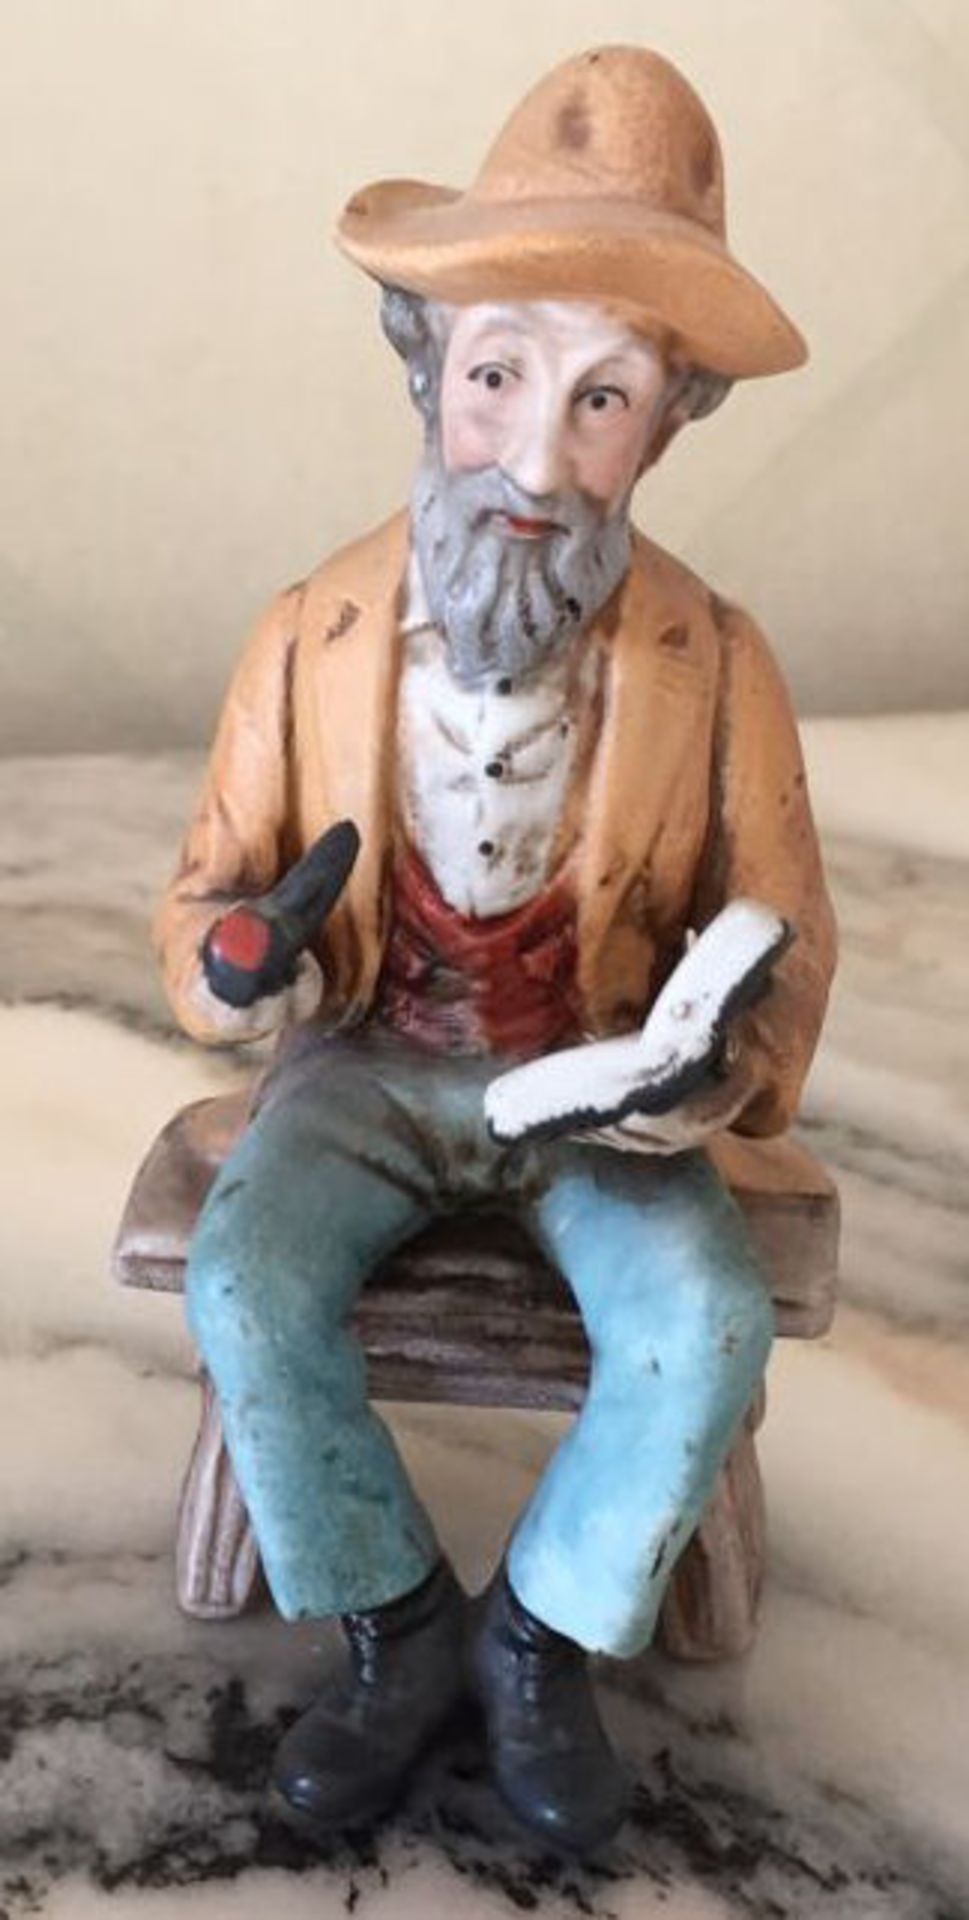 1 x Capodimonte Figurine Of Old Man on Stool - CL226 - Location: Knutsford WA16 - NO VAT ON THE